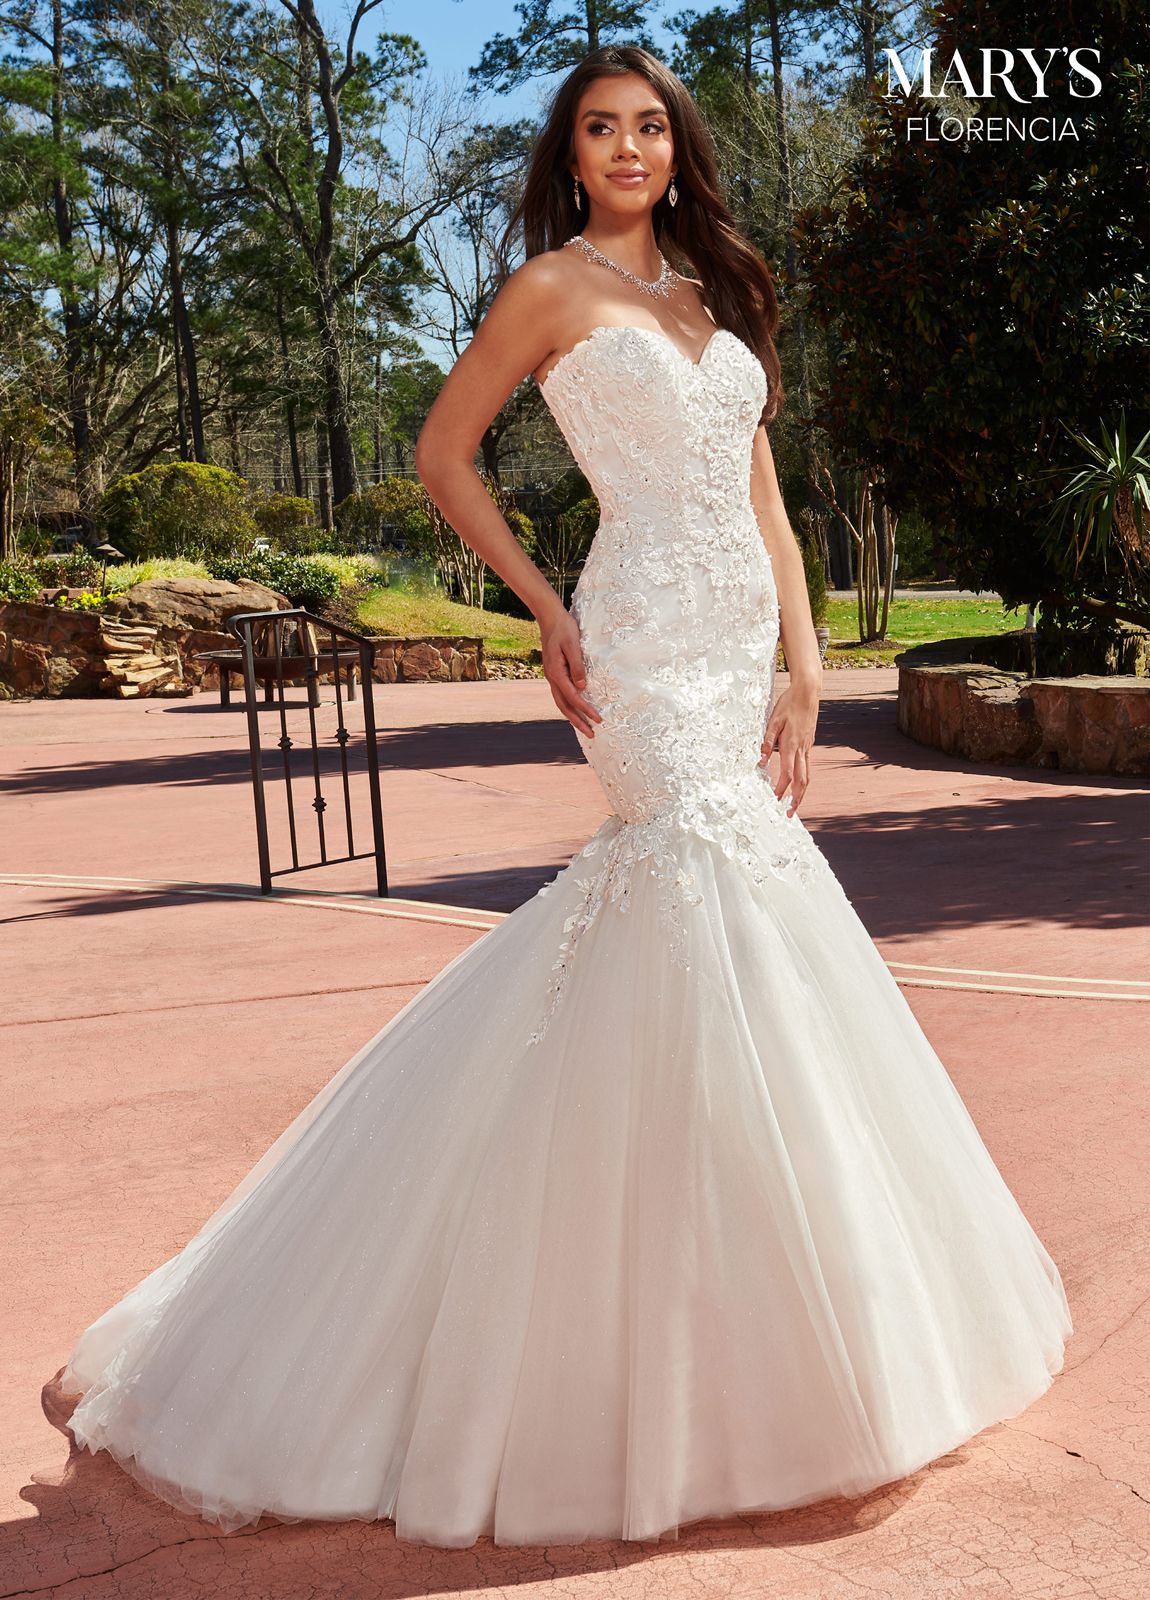 wedding dress shopping: expectation vs reality – That Girl from Sydney